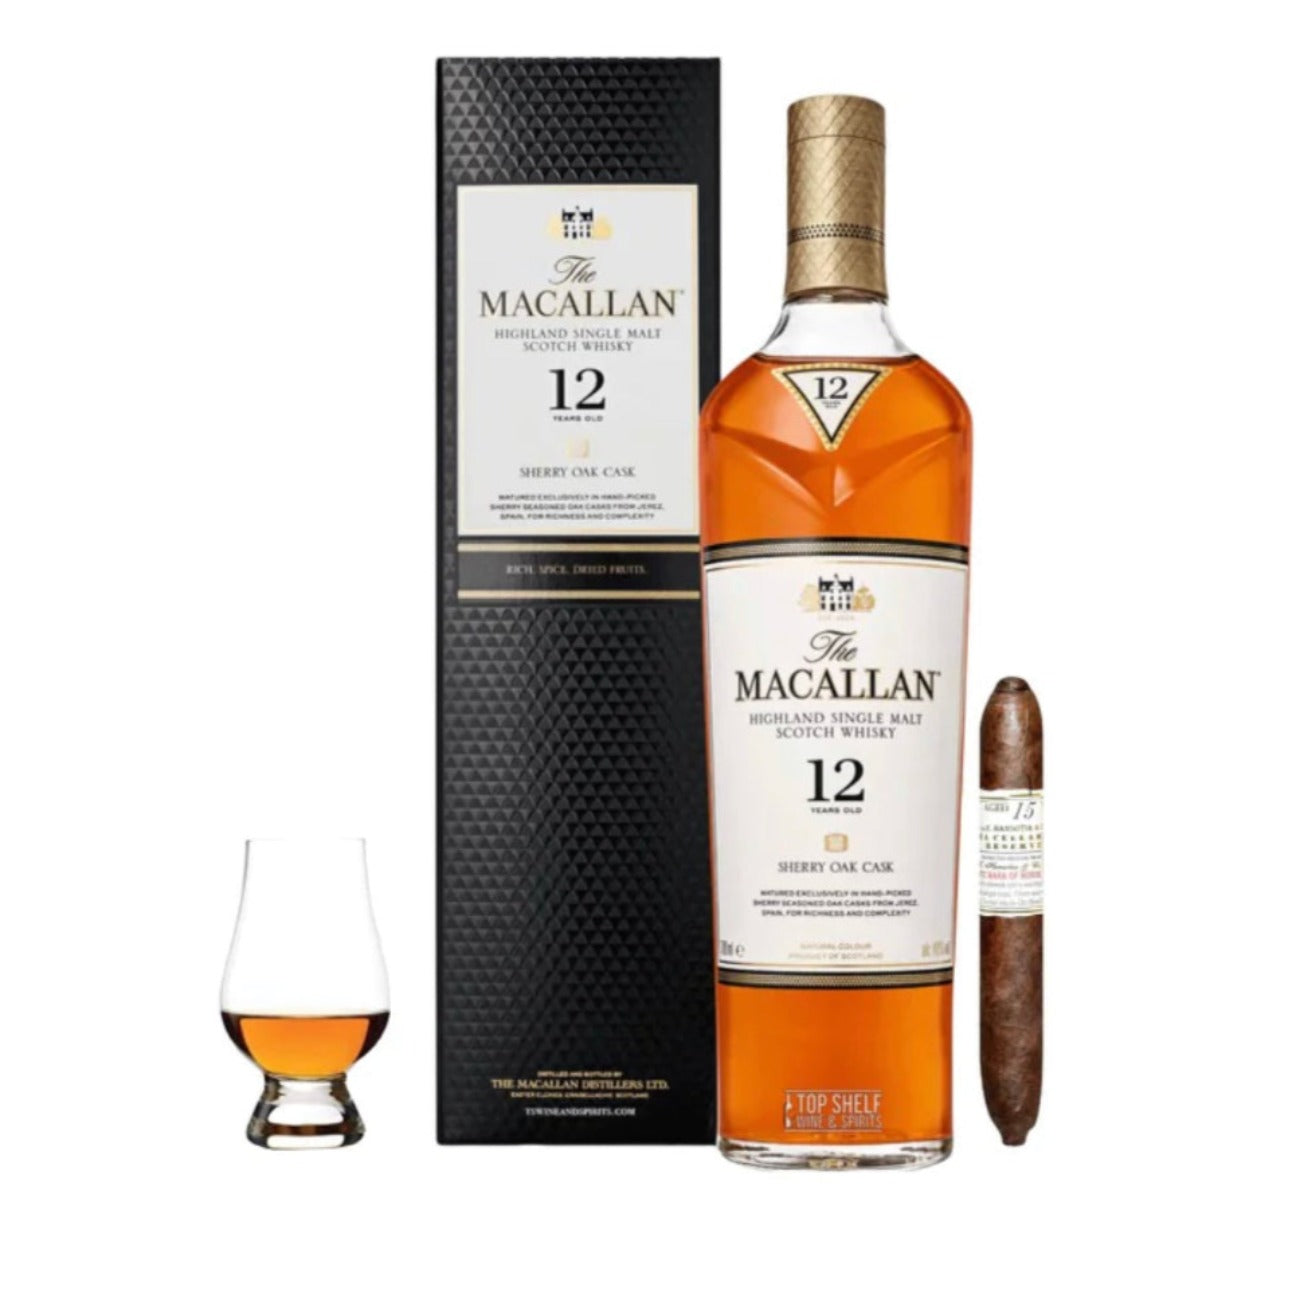 The Macallan | 12yr Sherry cask with Cigar and Glencarin Gift Set